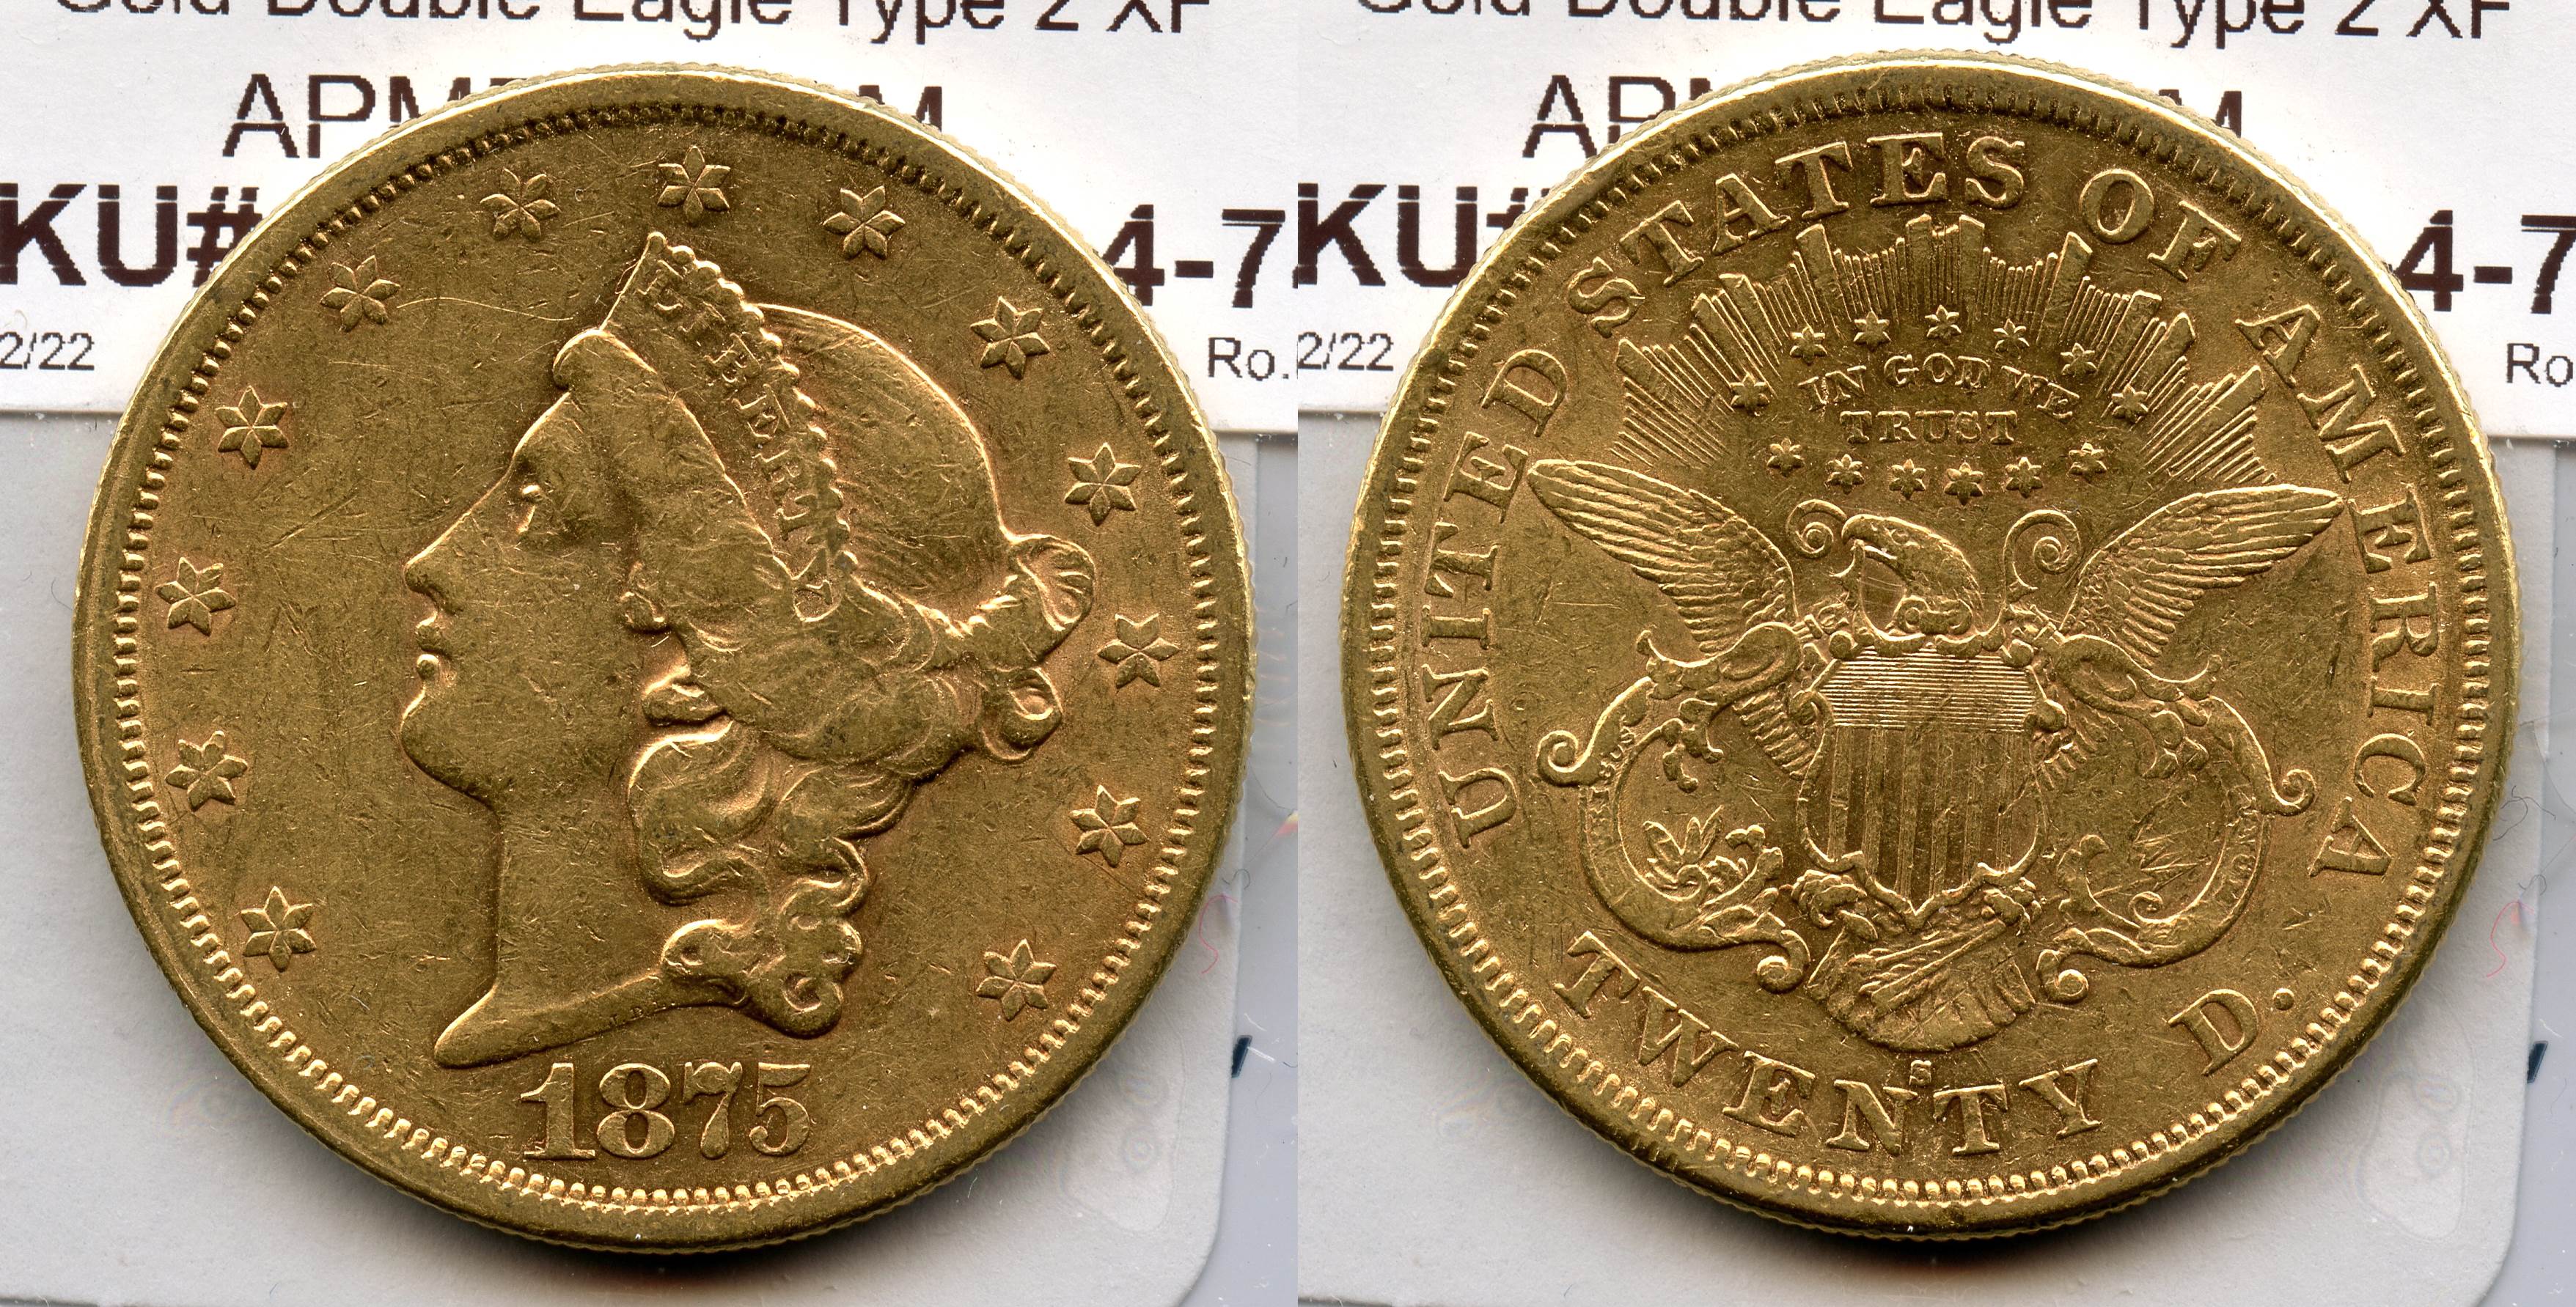 1875-S Liberty Head $20.00 Gold Double Eagle EF-40 #a large